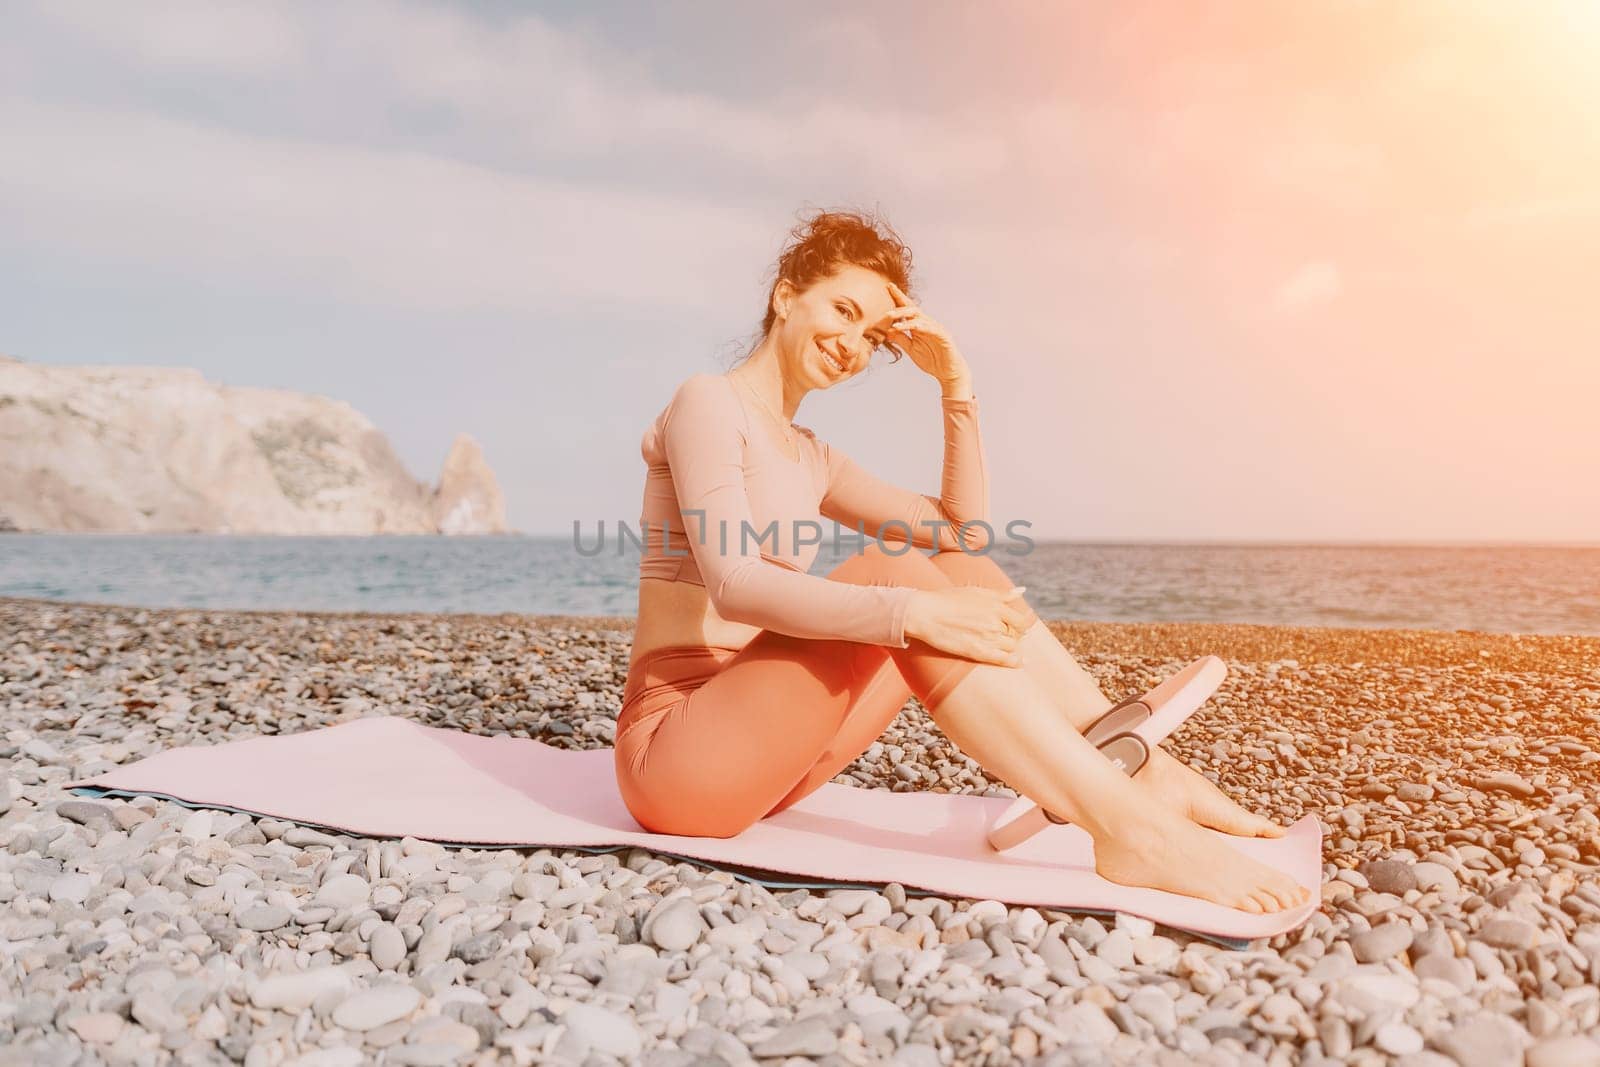 Middle aged well looking woman with black hair doing Pilates with the ring on the yoga mat near the sea on the pebble beach. Female fitness yoga concept. Healthy lifestyle, harmony and meditation.